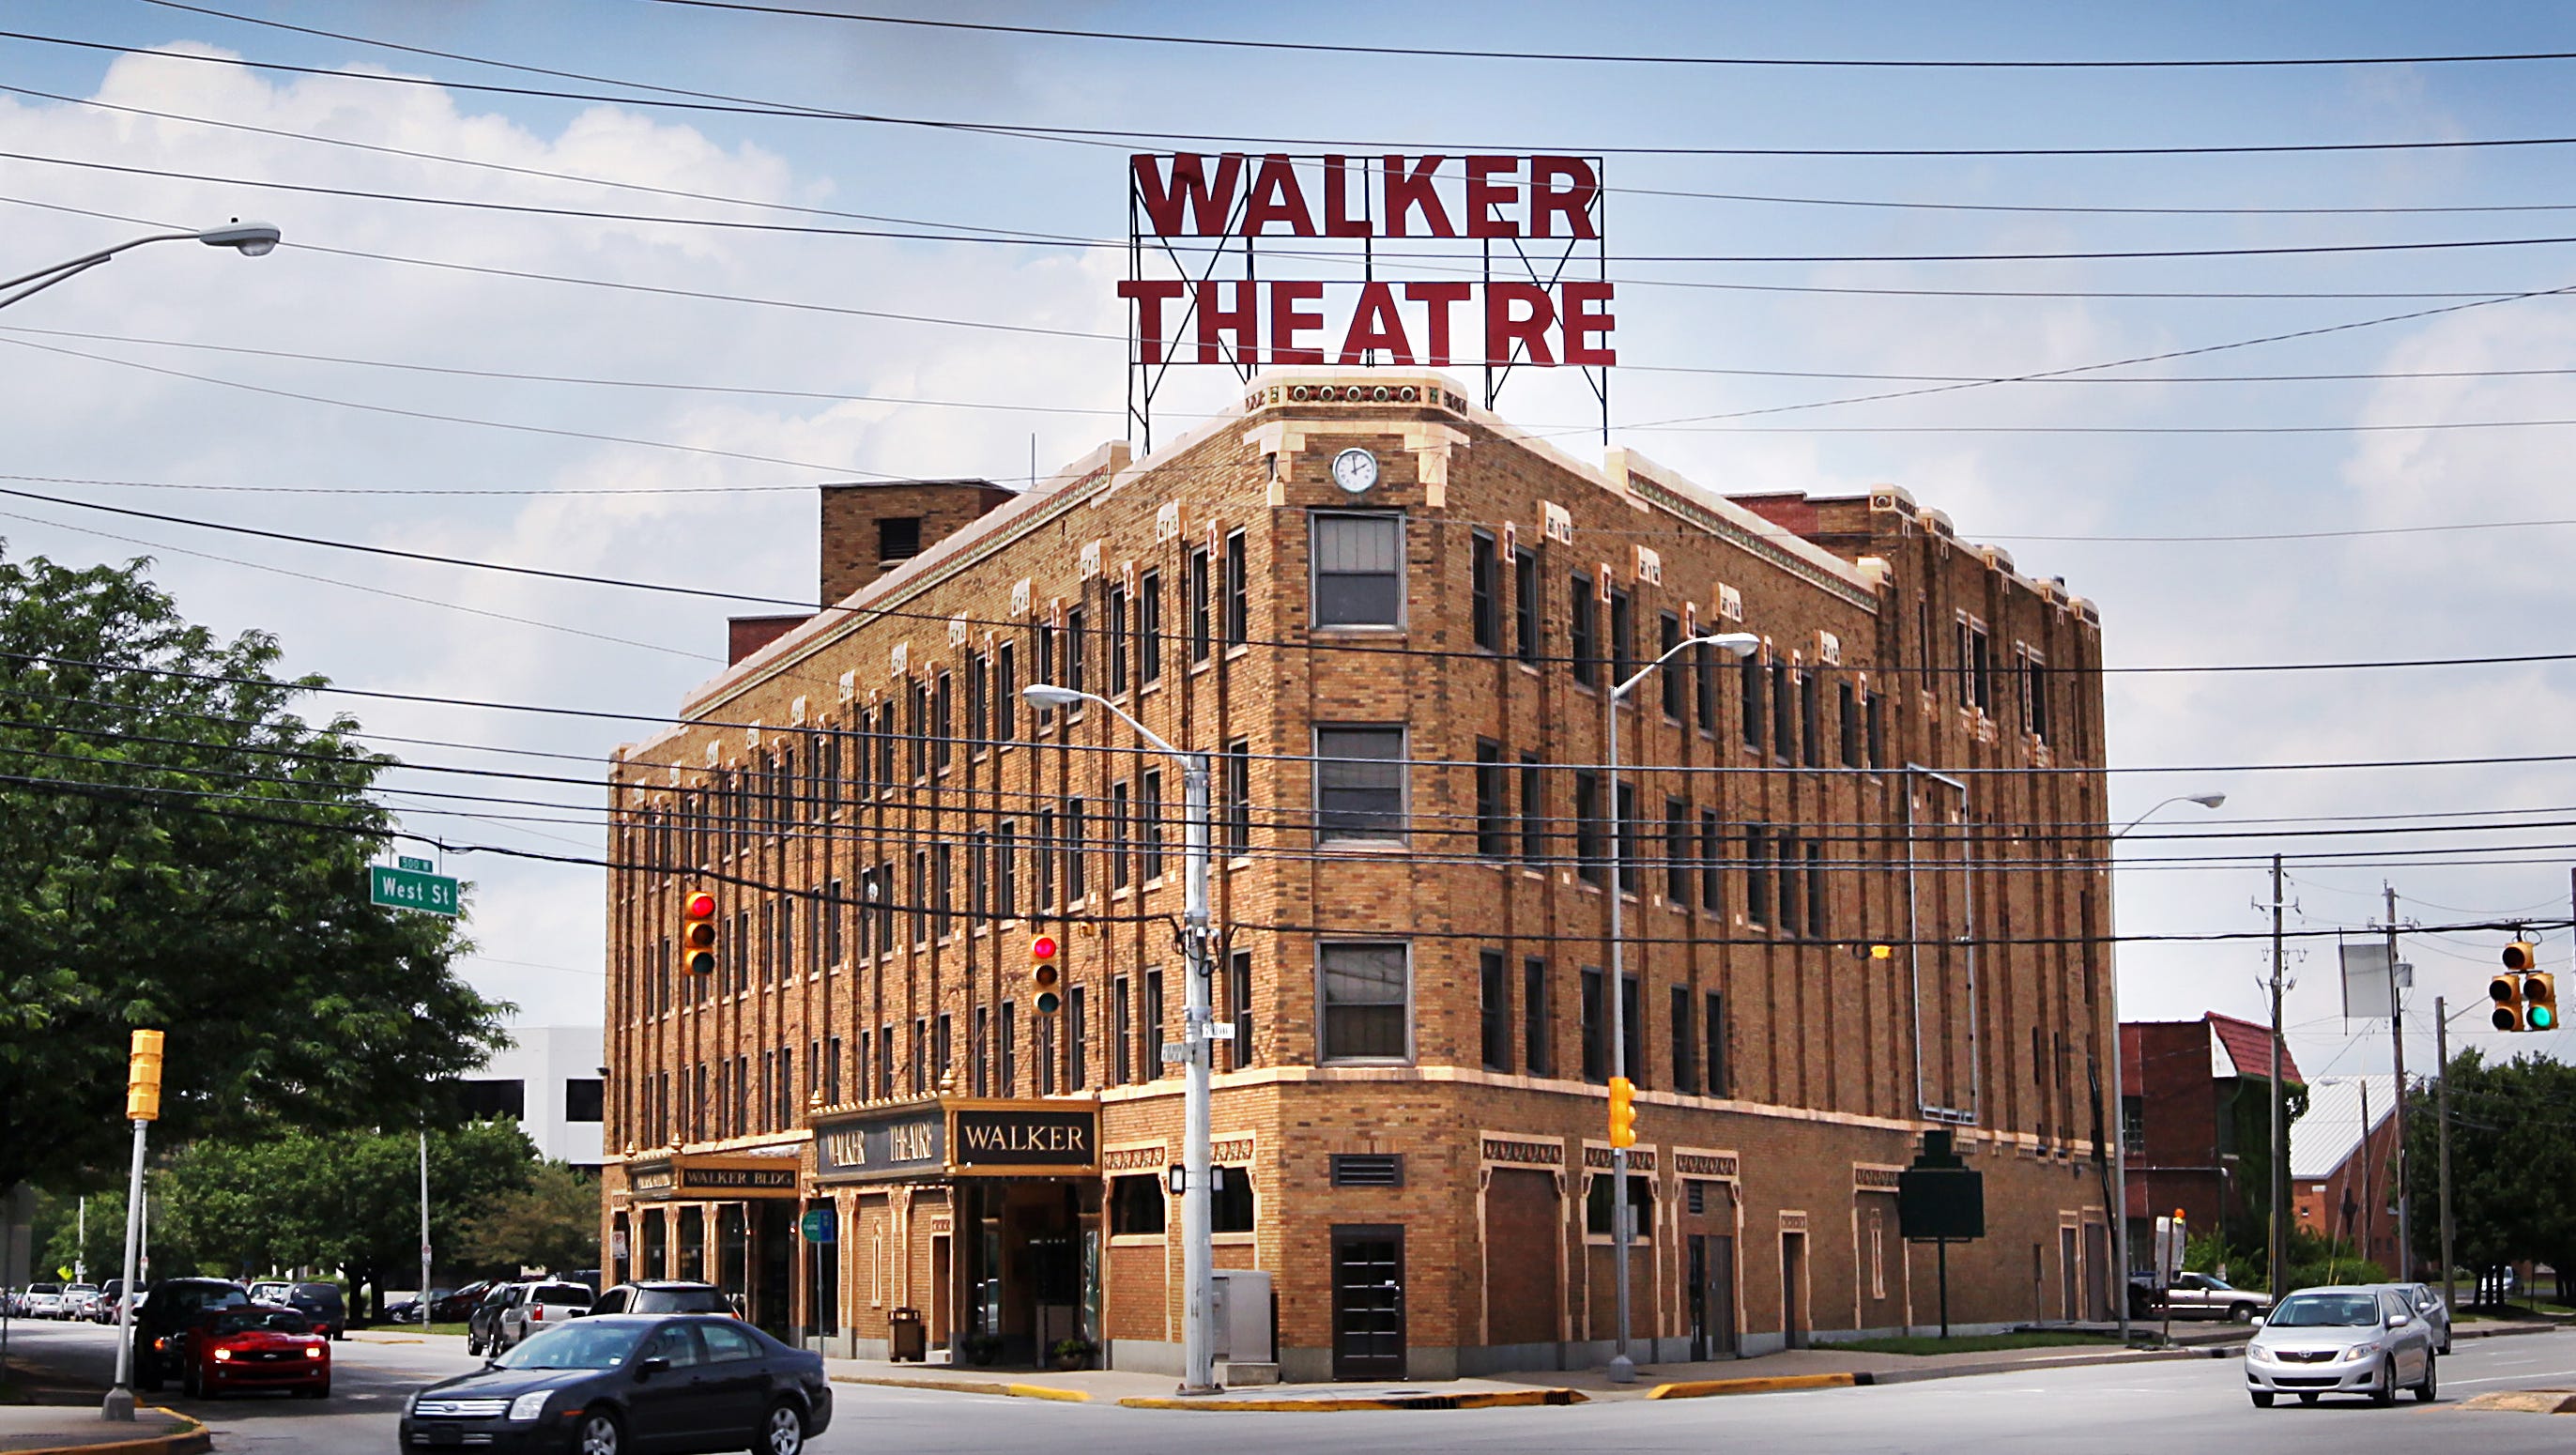 Walker Theatre will get more than $15 million to renovate